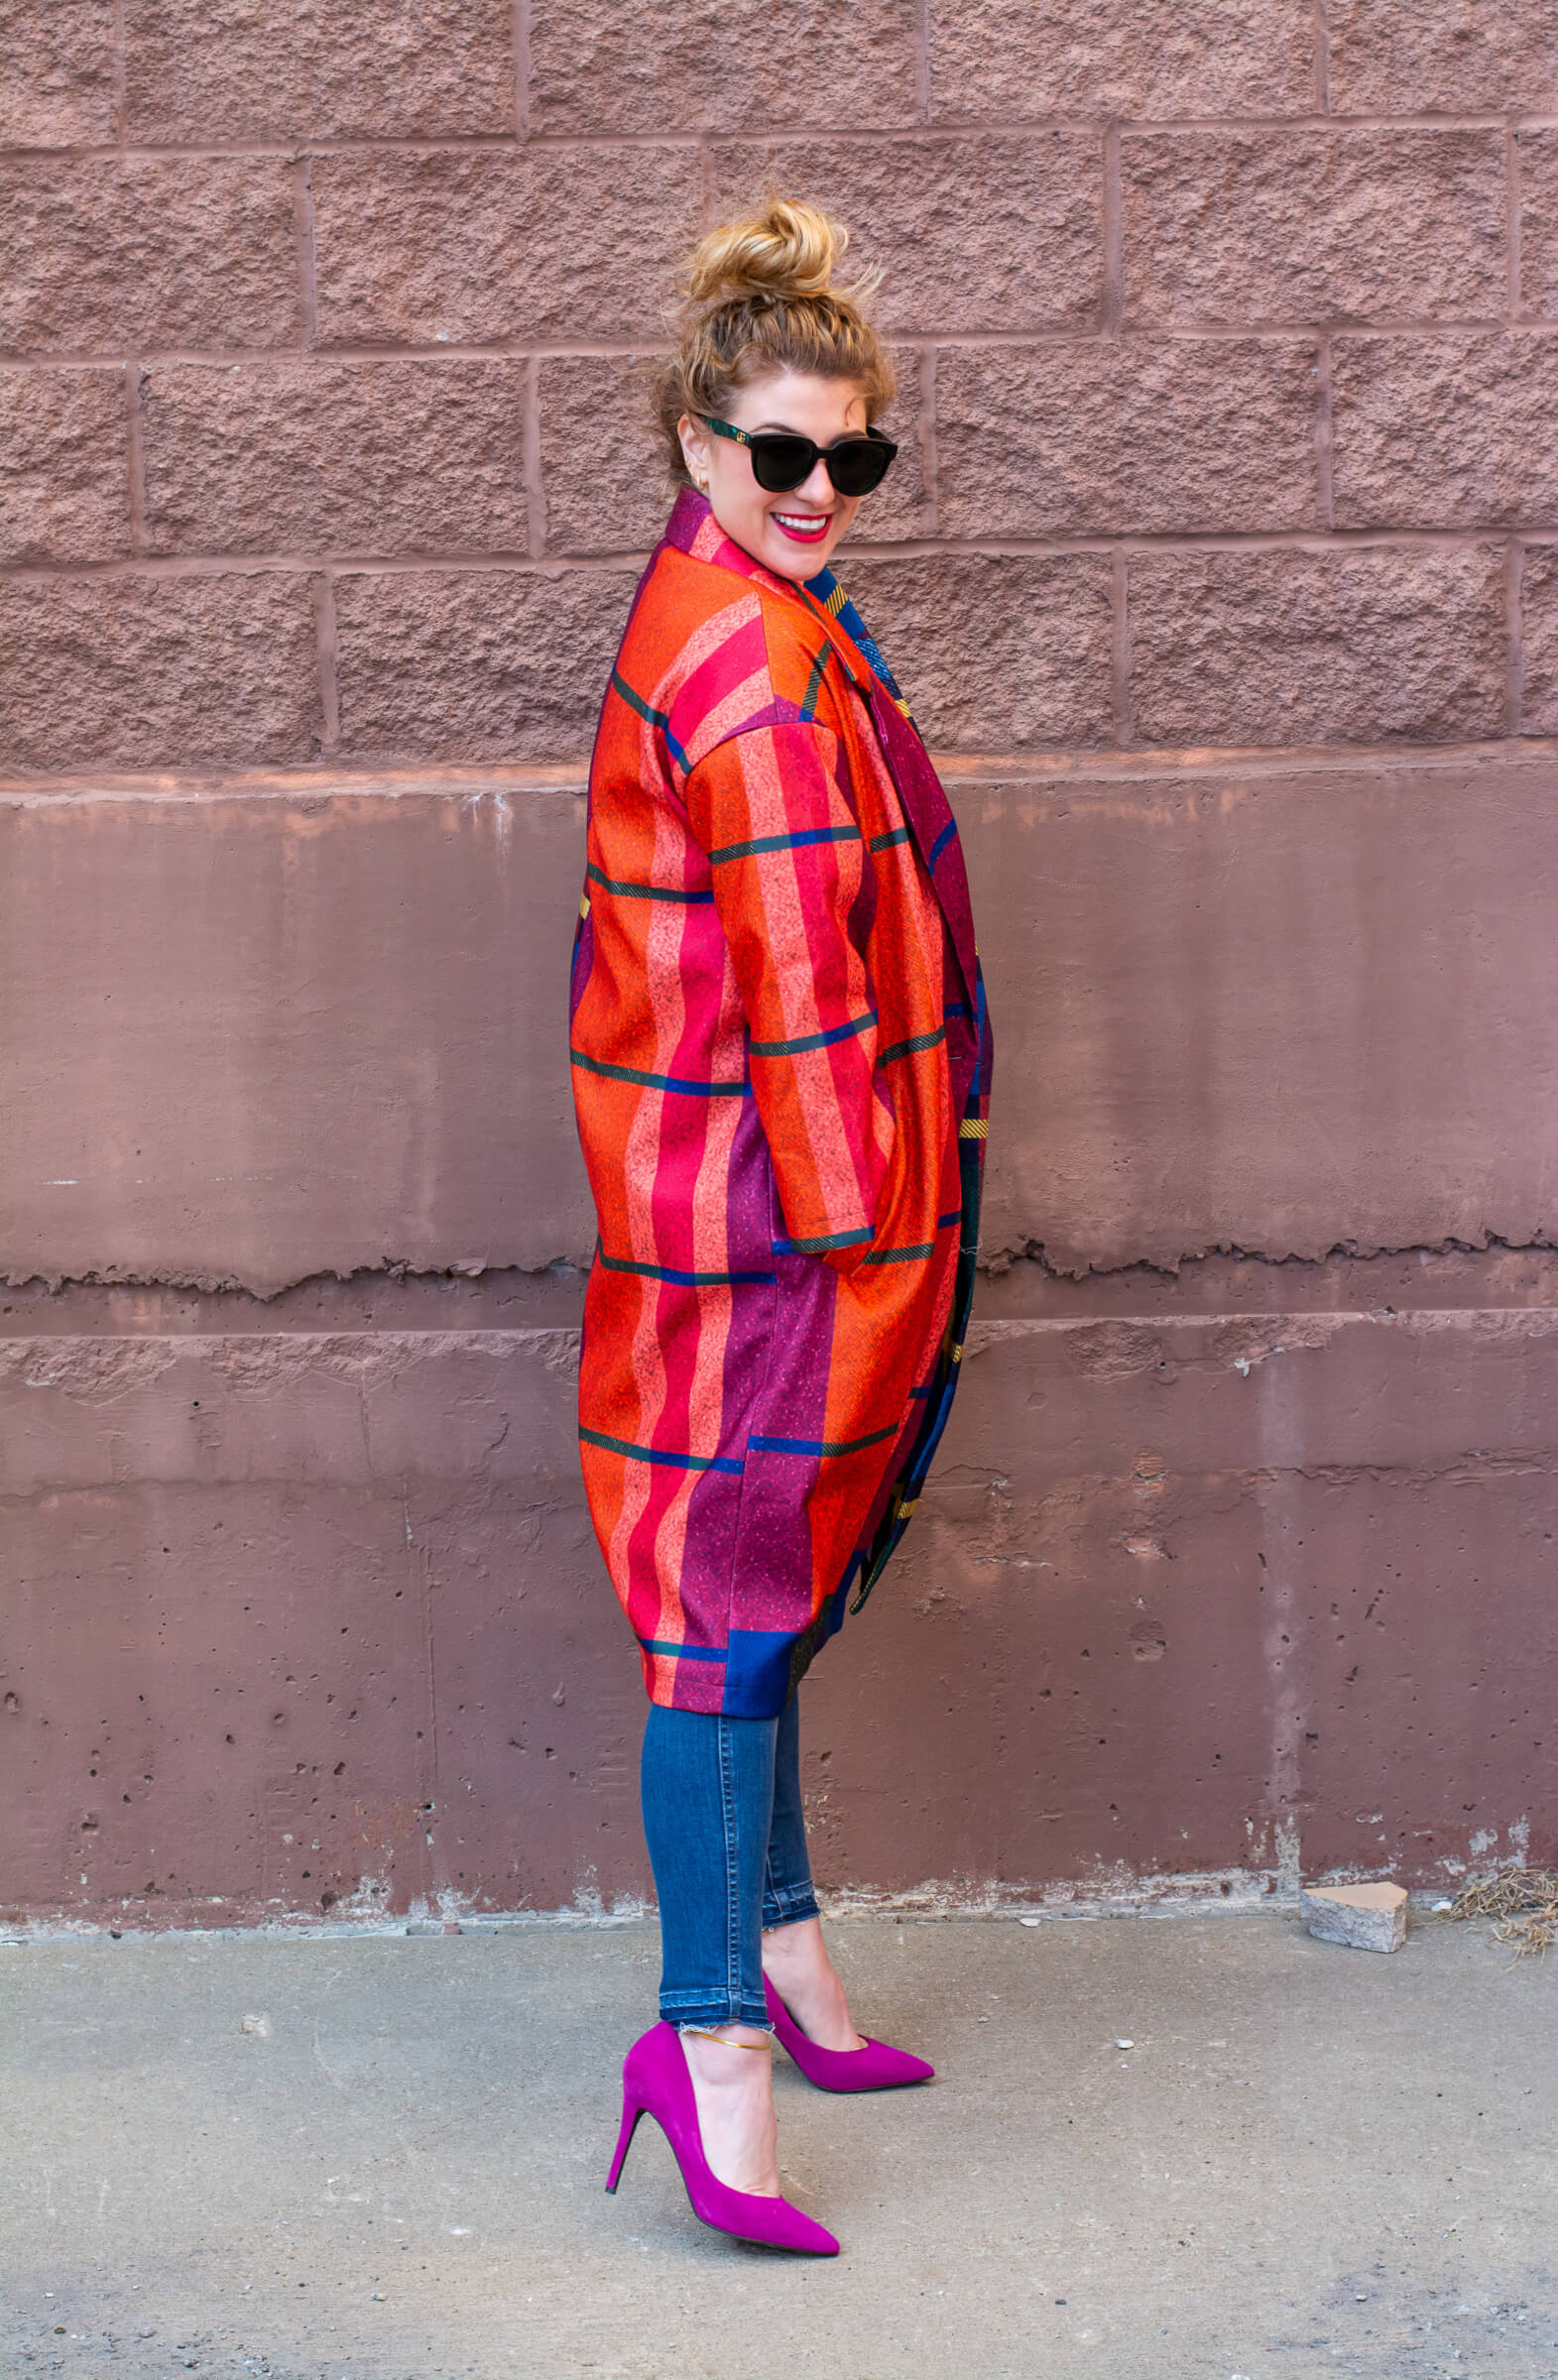 Bright Car Coat for Early Spring with Pink Pumps. | LSR